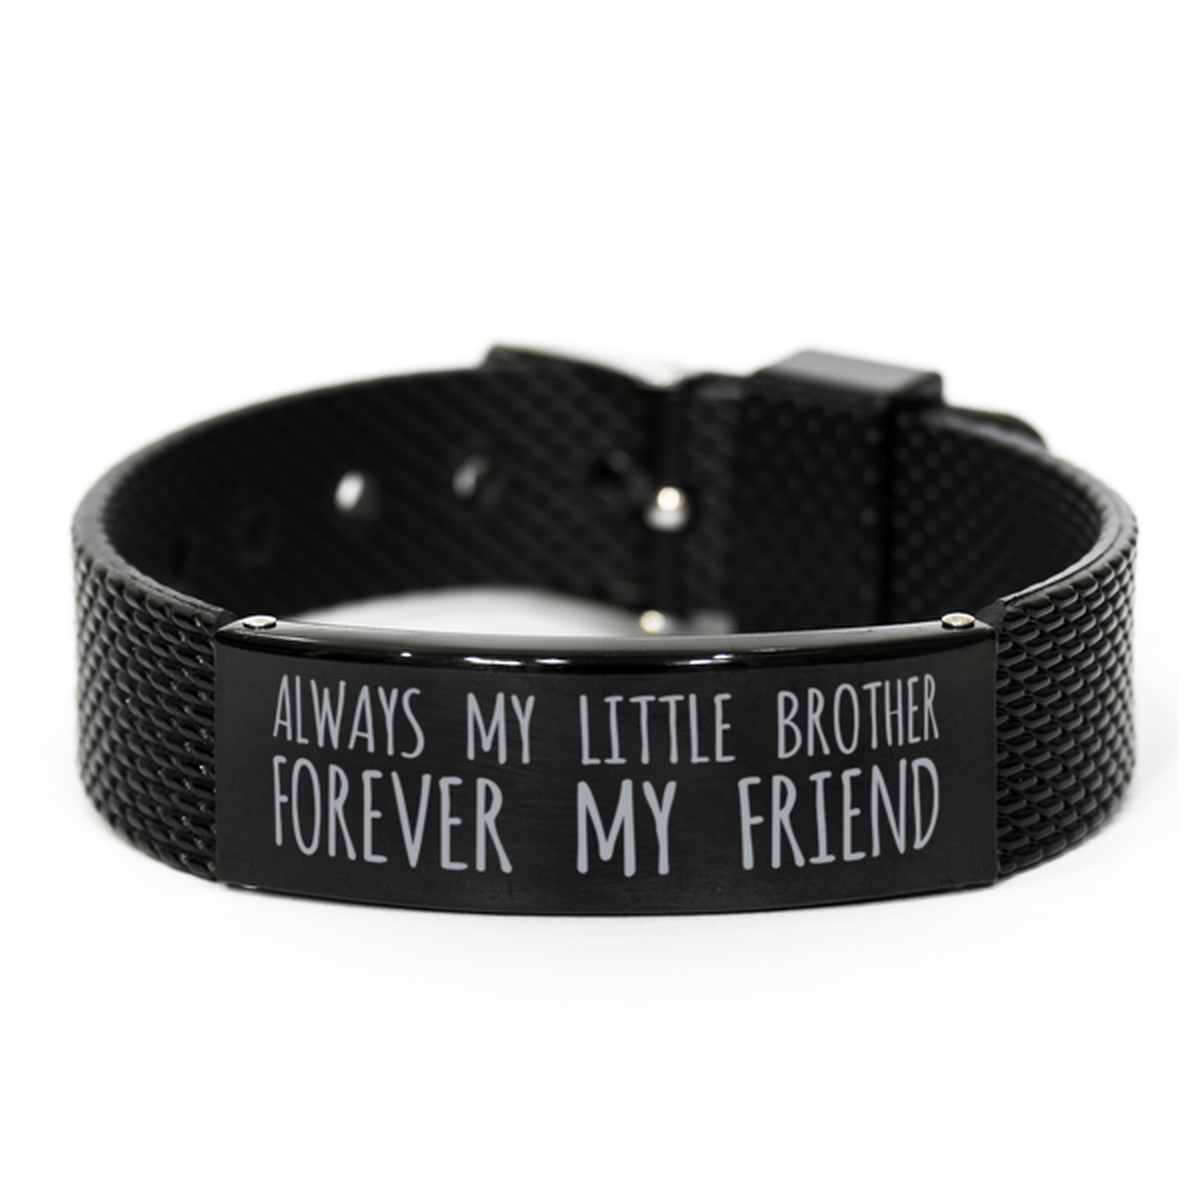 Inspirational Little Brother Black Shark Mesh Bracelet, Always My Little Brother Forever My Friend, Best Birthday Gifts for Family Friends